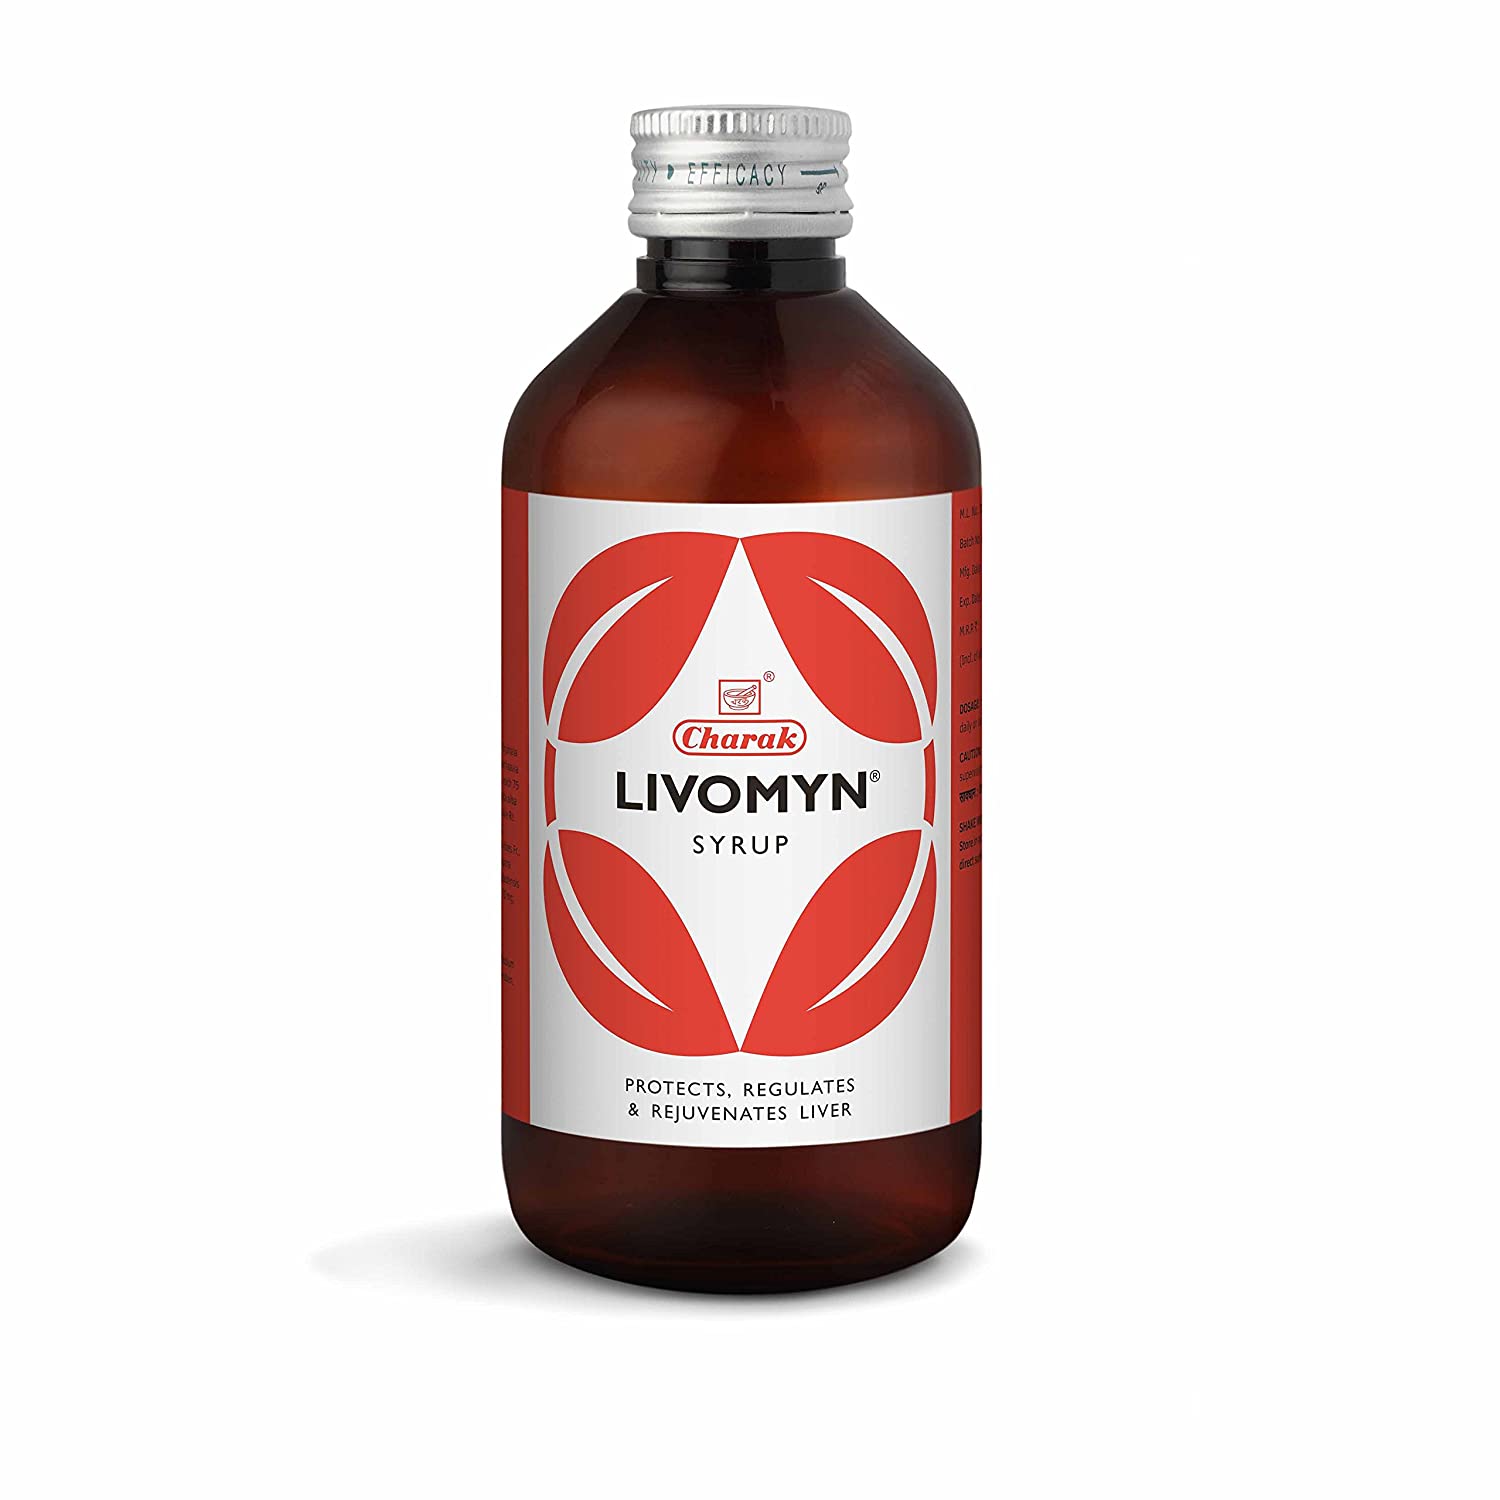 Shop Charak livomyn syrup 200ml at price 128.00 from Charak Online - Ayush Care